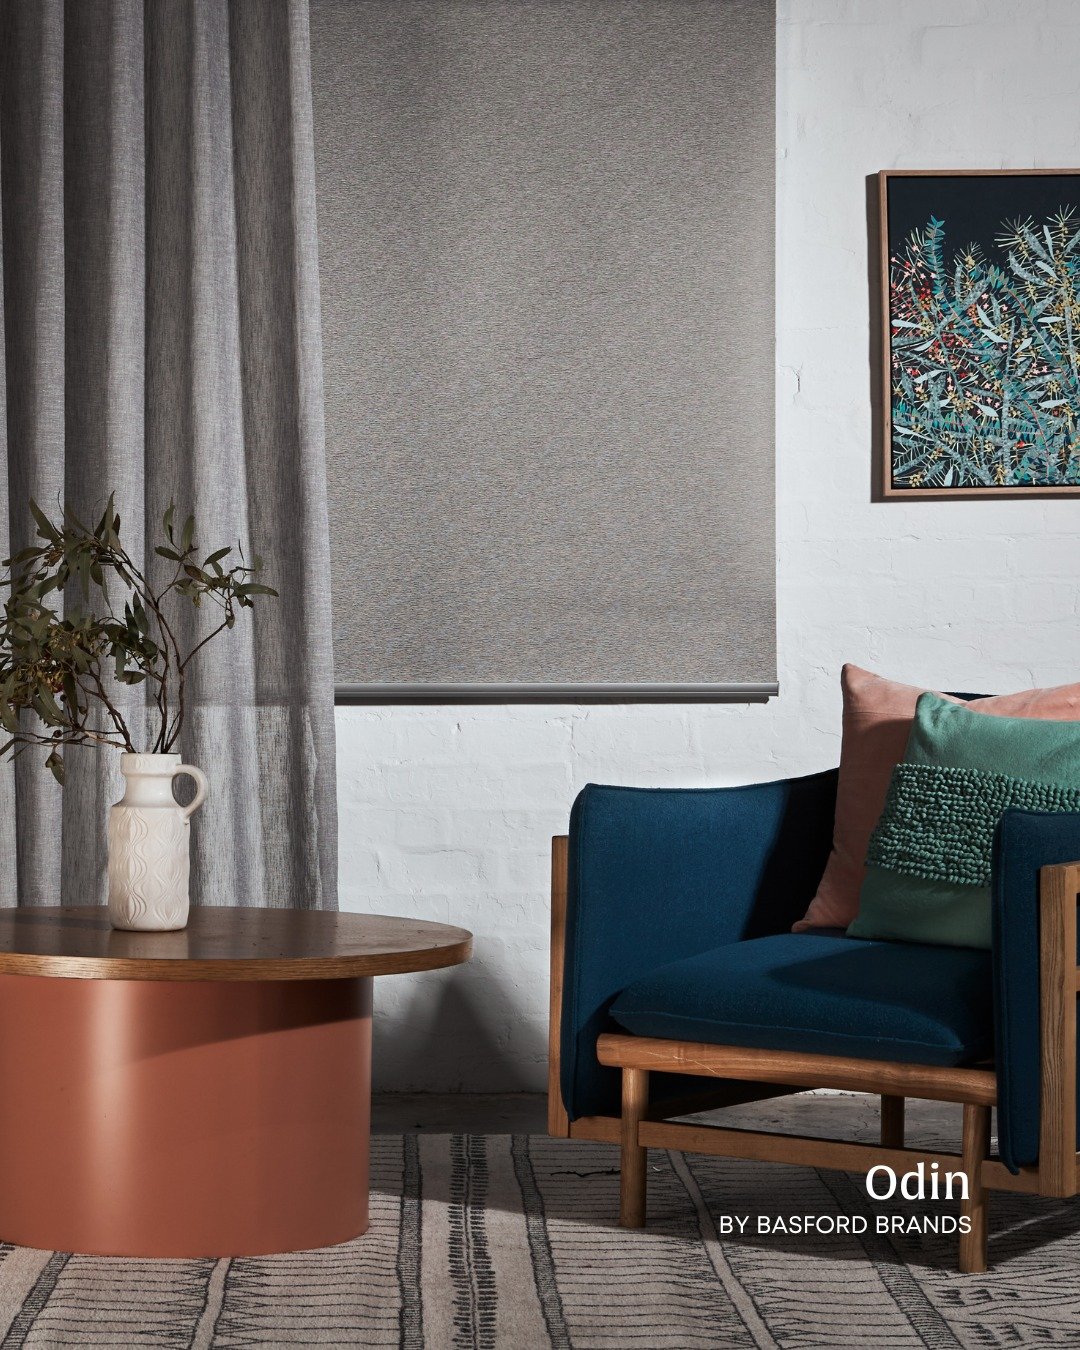 This is Odin by Basford Brands - a stunning sheer curtain fabric.

It&rsquo;s organic slub mimics all the most desirable features of a classic linen sheer, with the undeniable ease of polyester.

Available in 15 colours.

View Odin along with our com